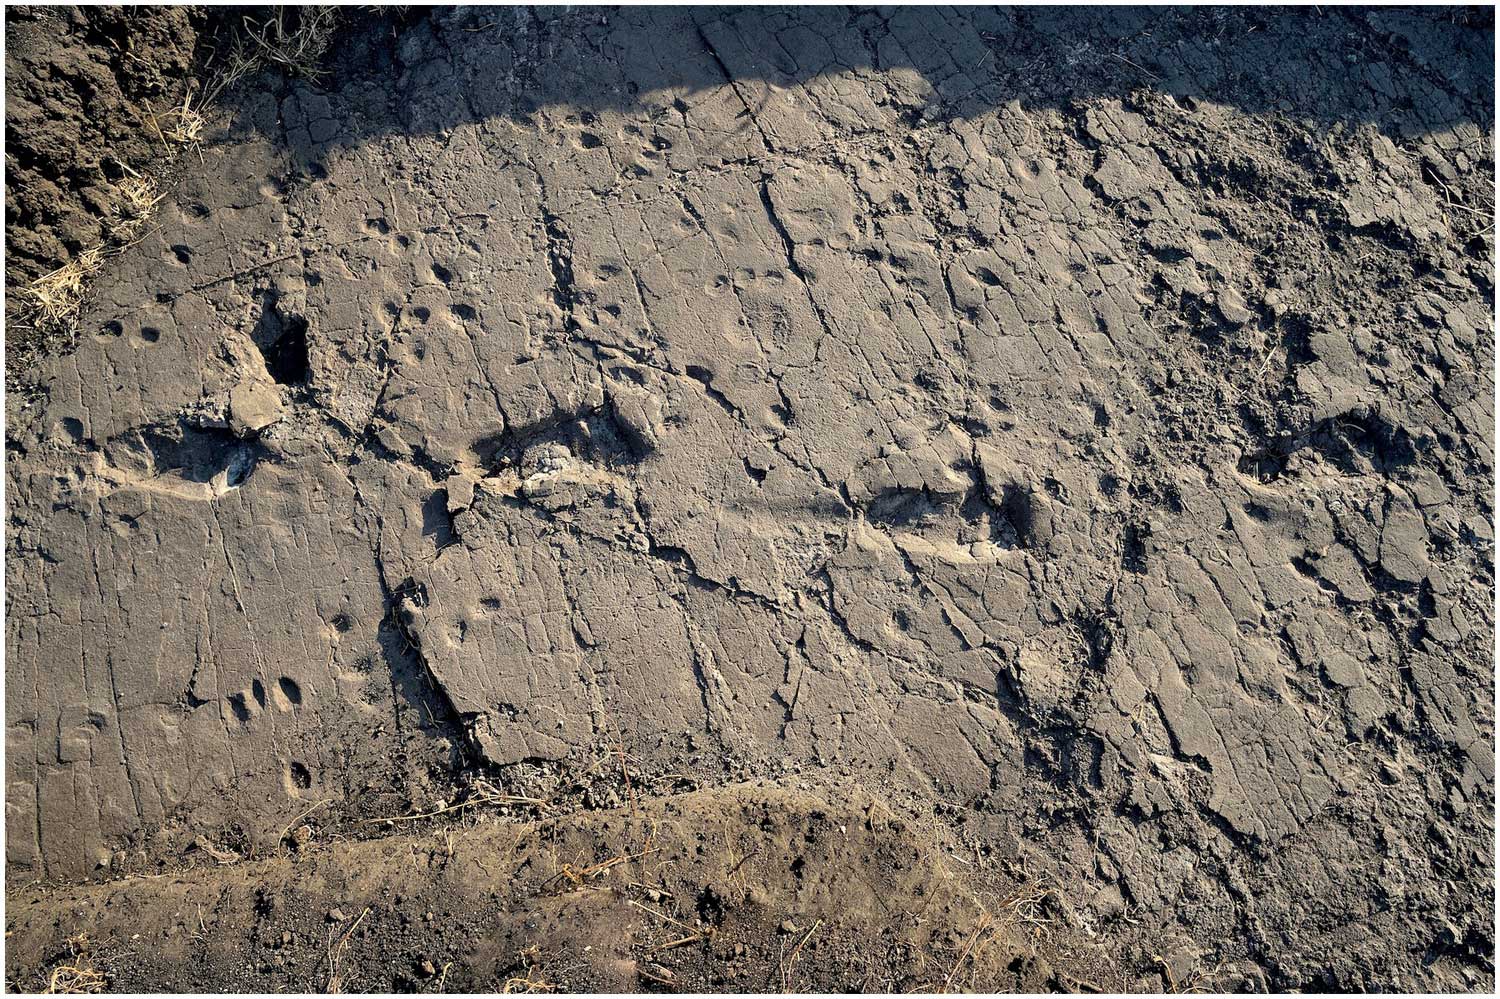 Photograph of ancient trackways of Australopithecus afrarensis from Tanzania. The photo shows one set footprints from a hominid walking in a straight line. Around the hominid footprints are depressions that might be smaller tracks.